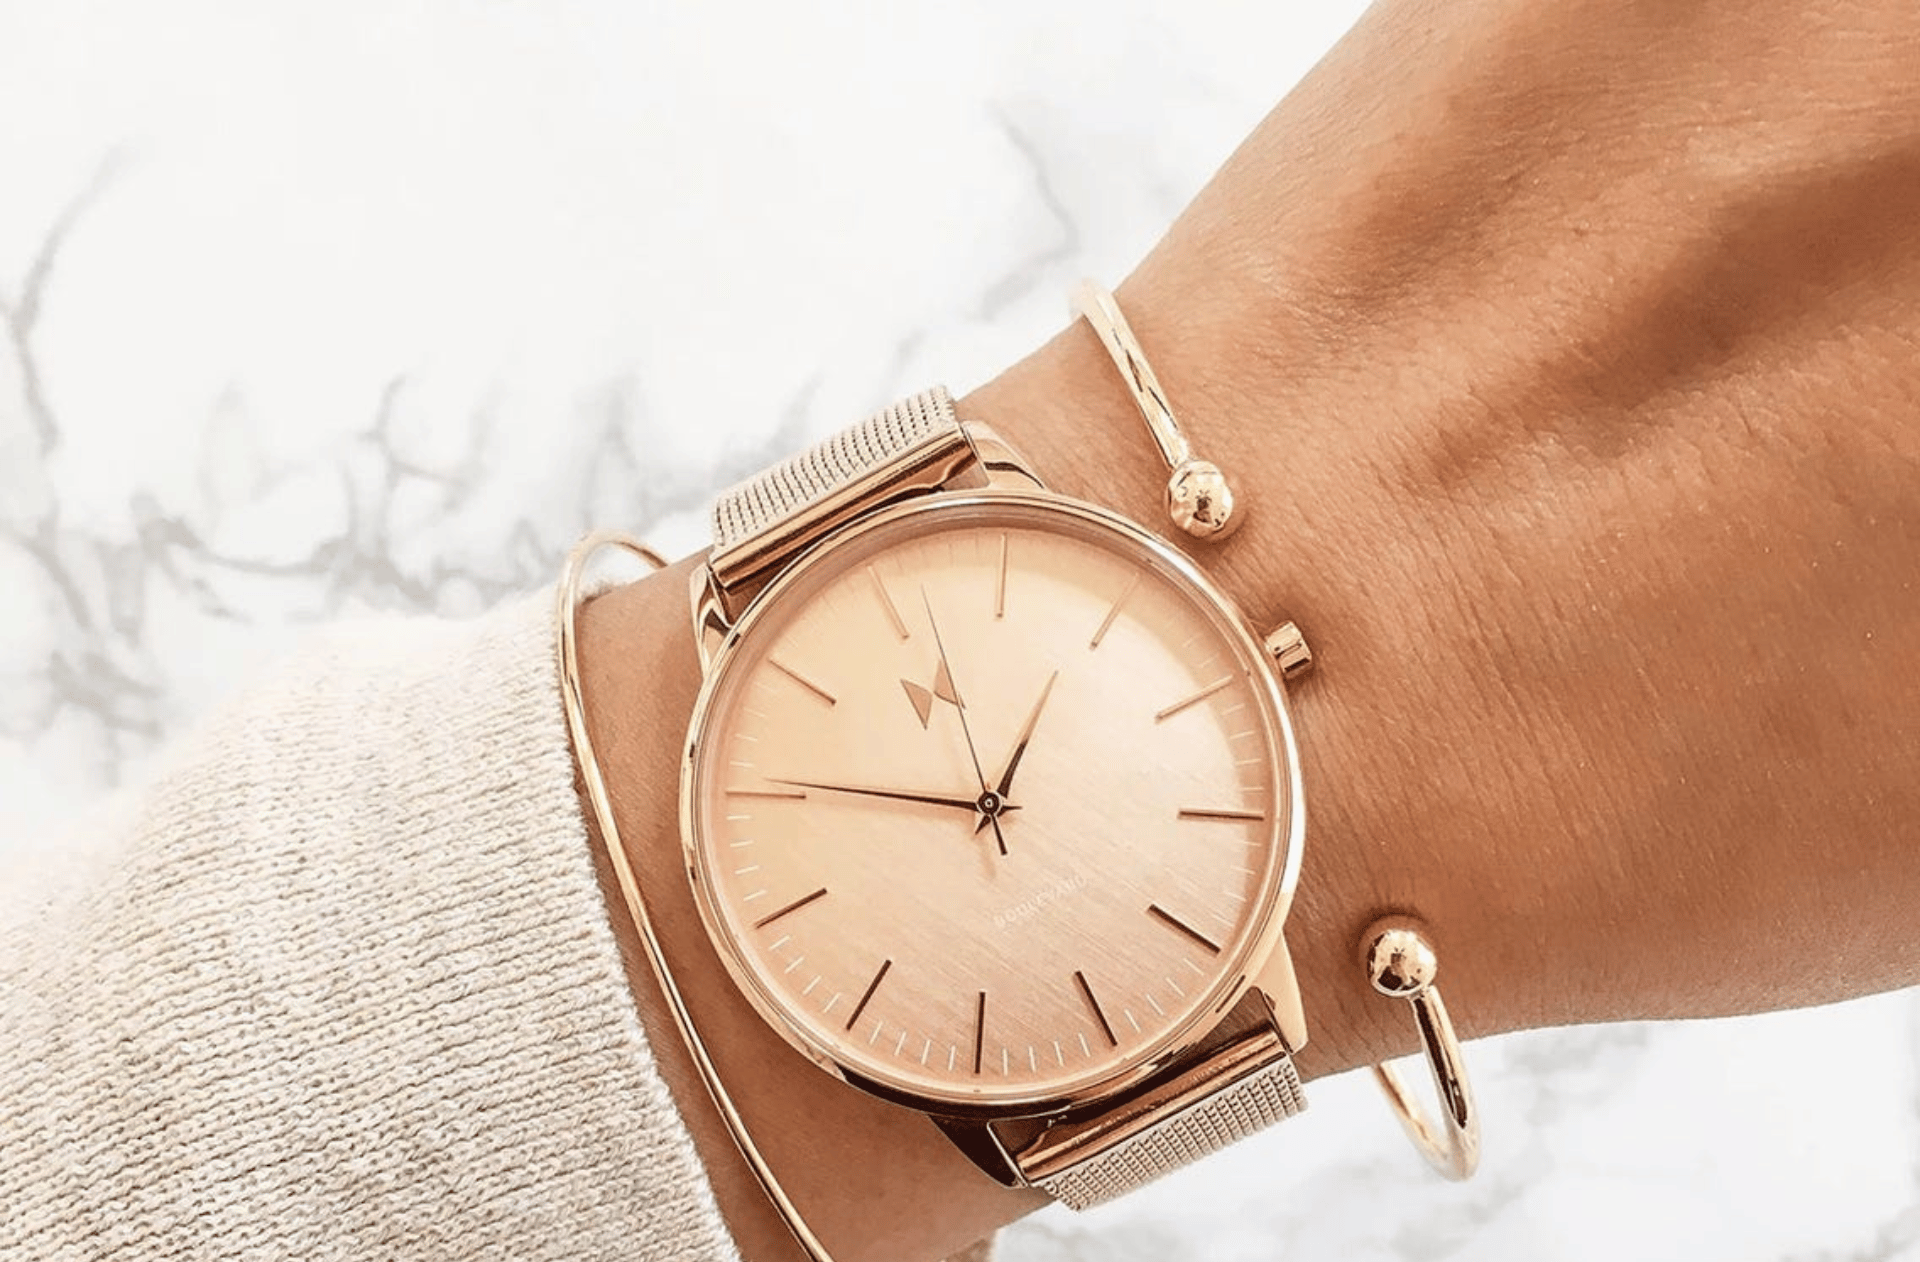 Best Affordable Ladies' Watches - Low Price Watches for Women